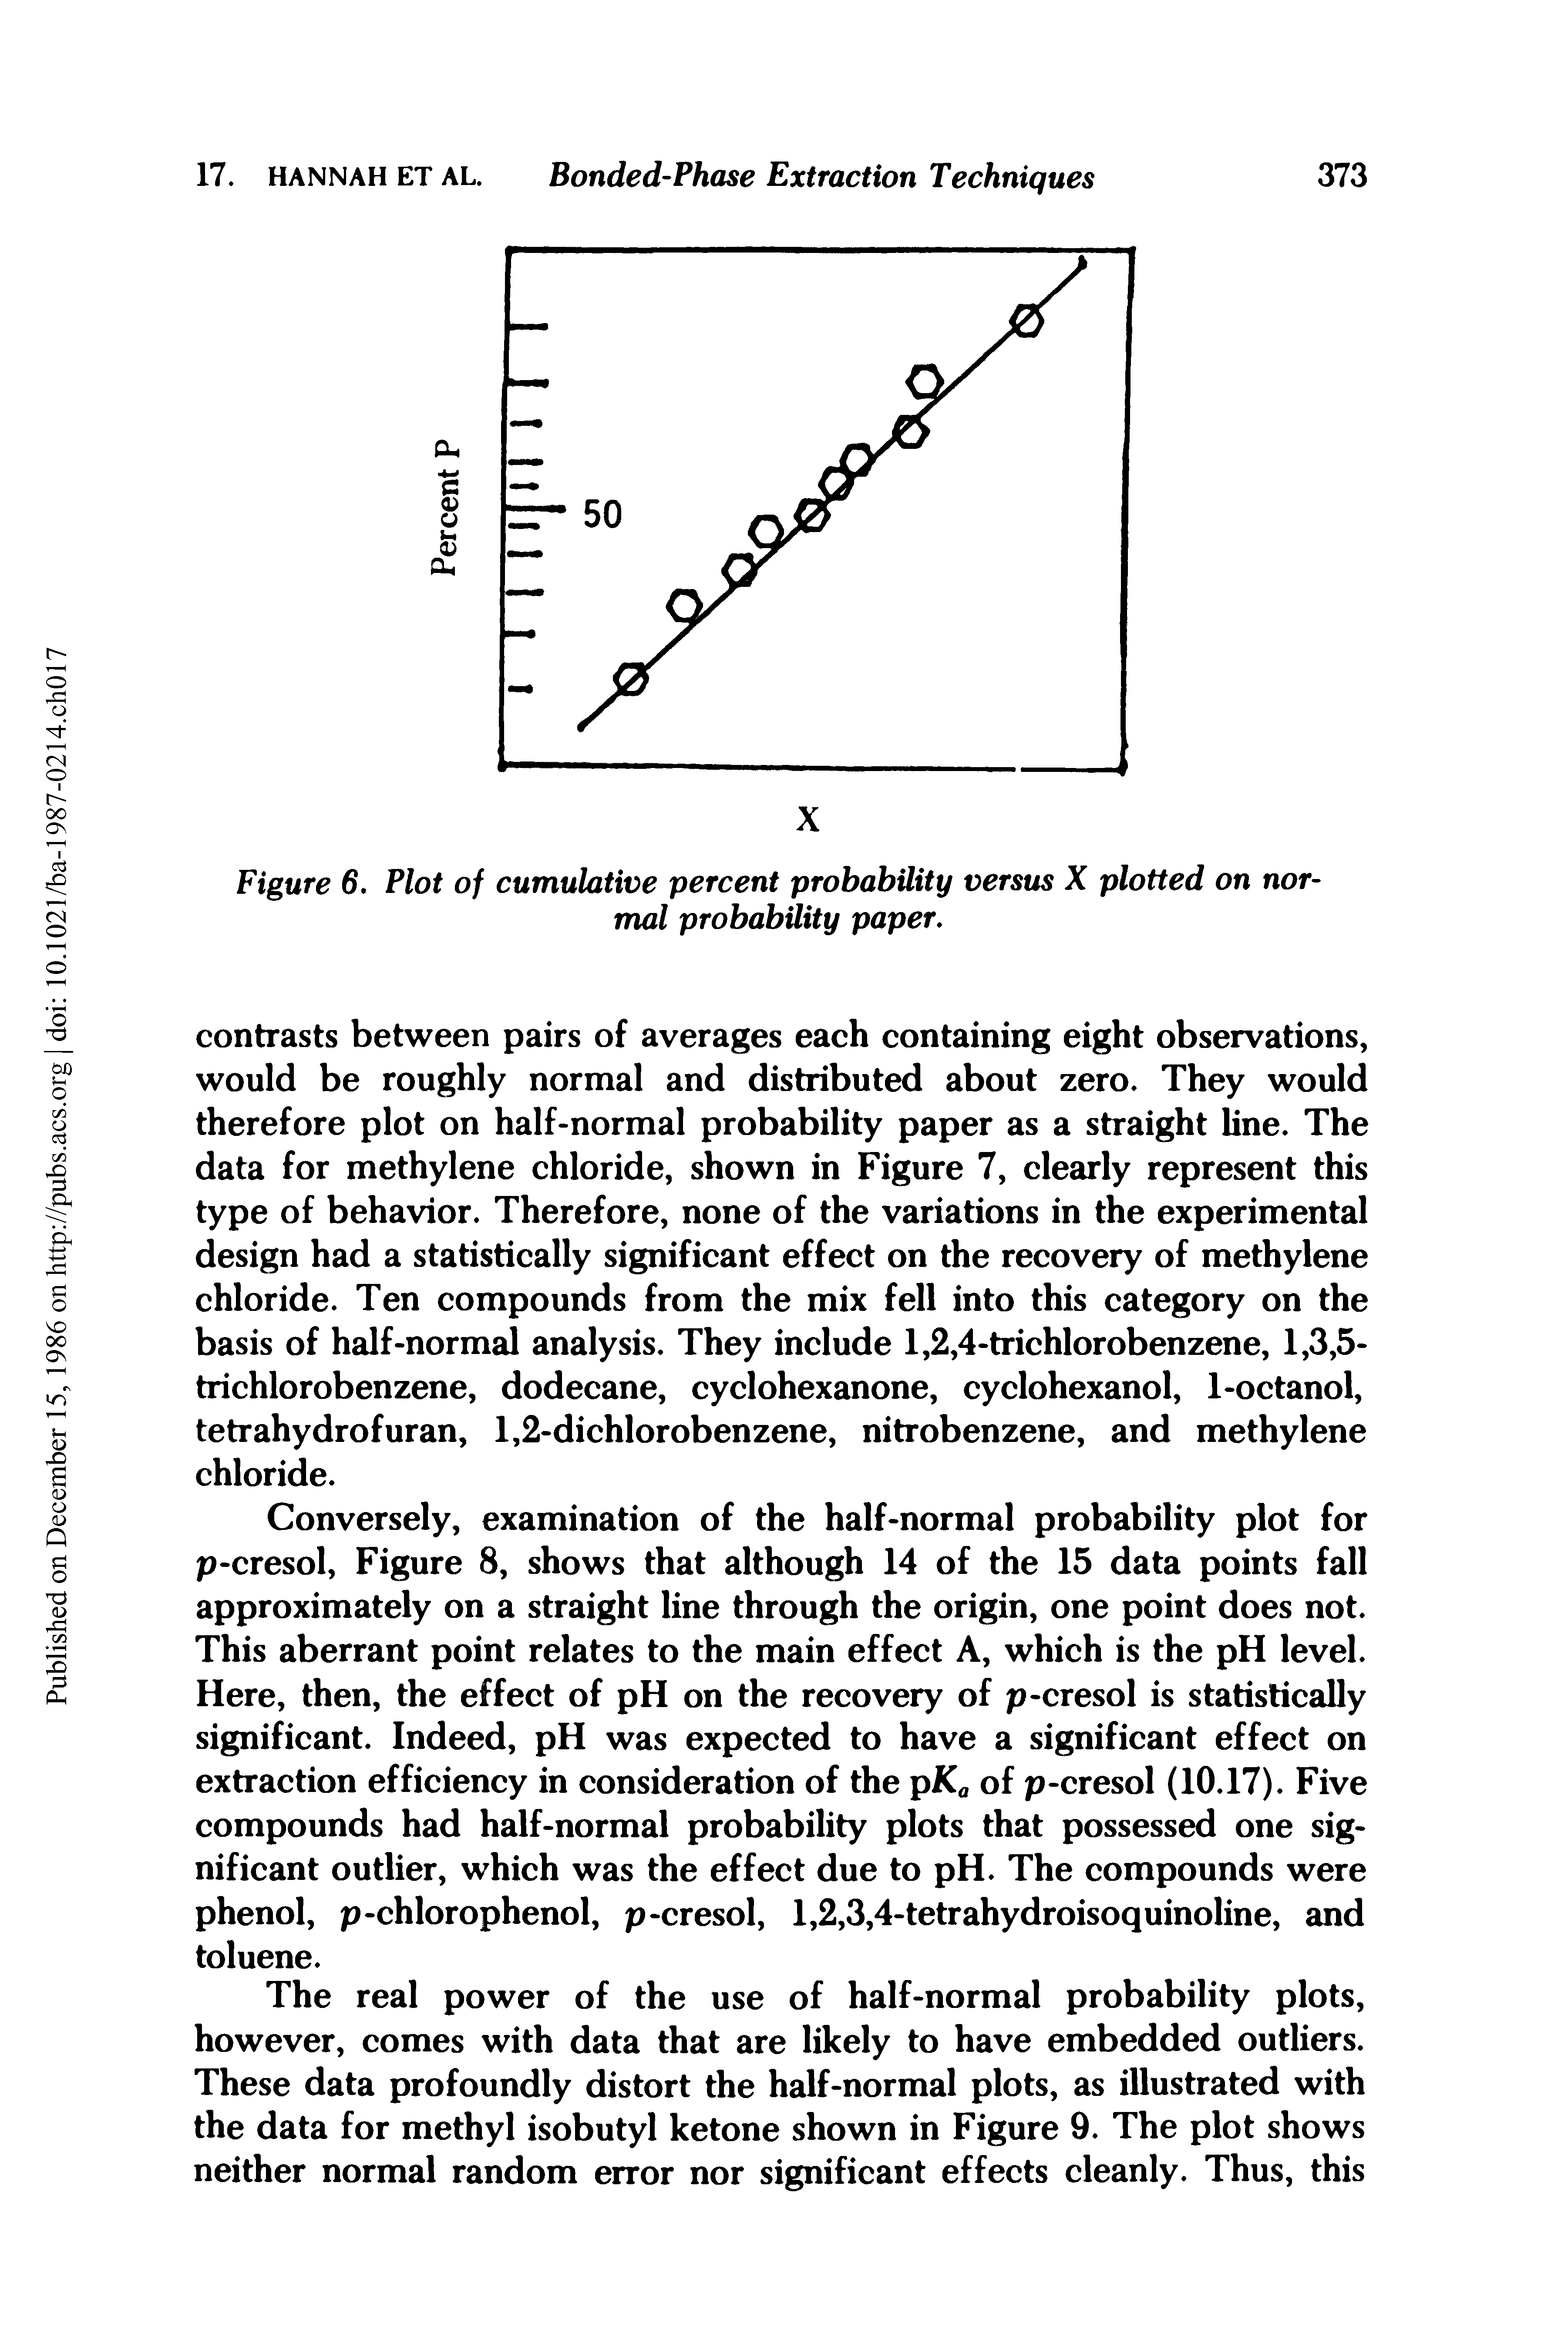 Figure 6. Plot of cumulative percent probability versus X plotted on normal probability paper.